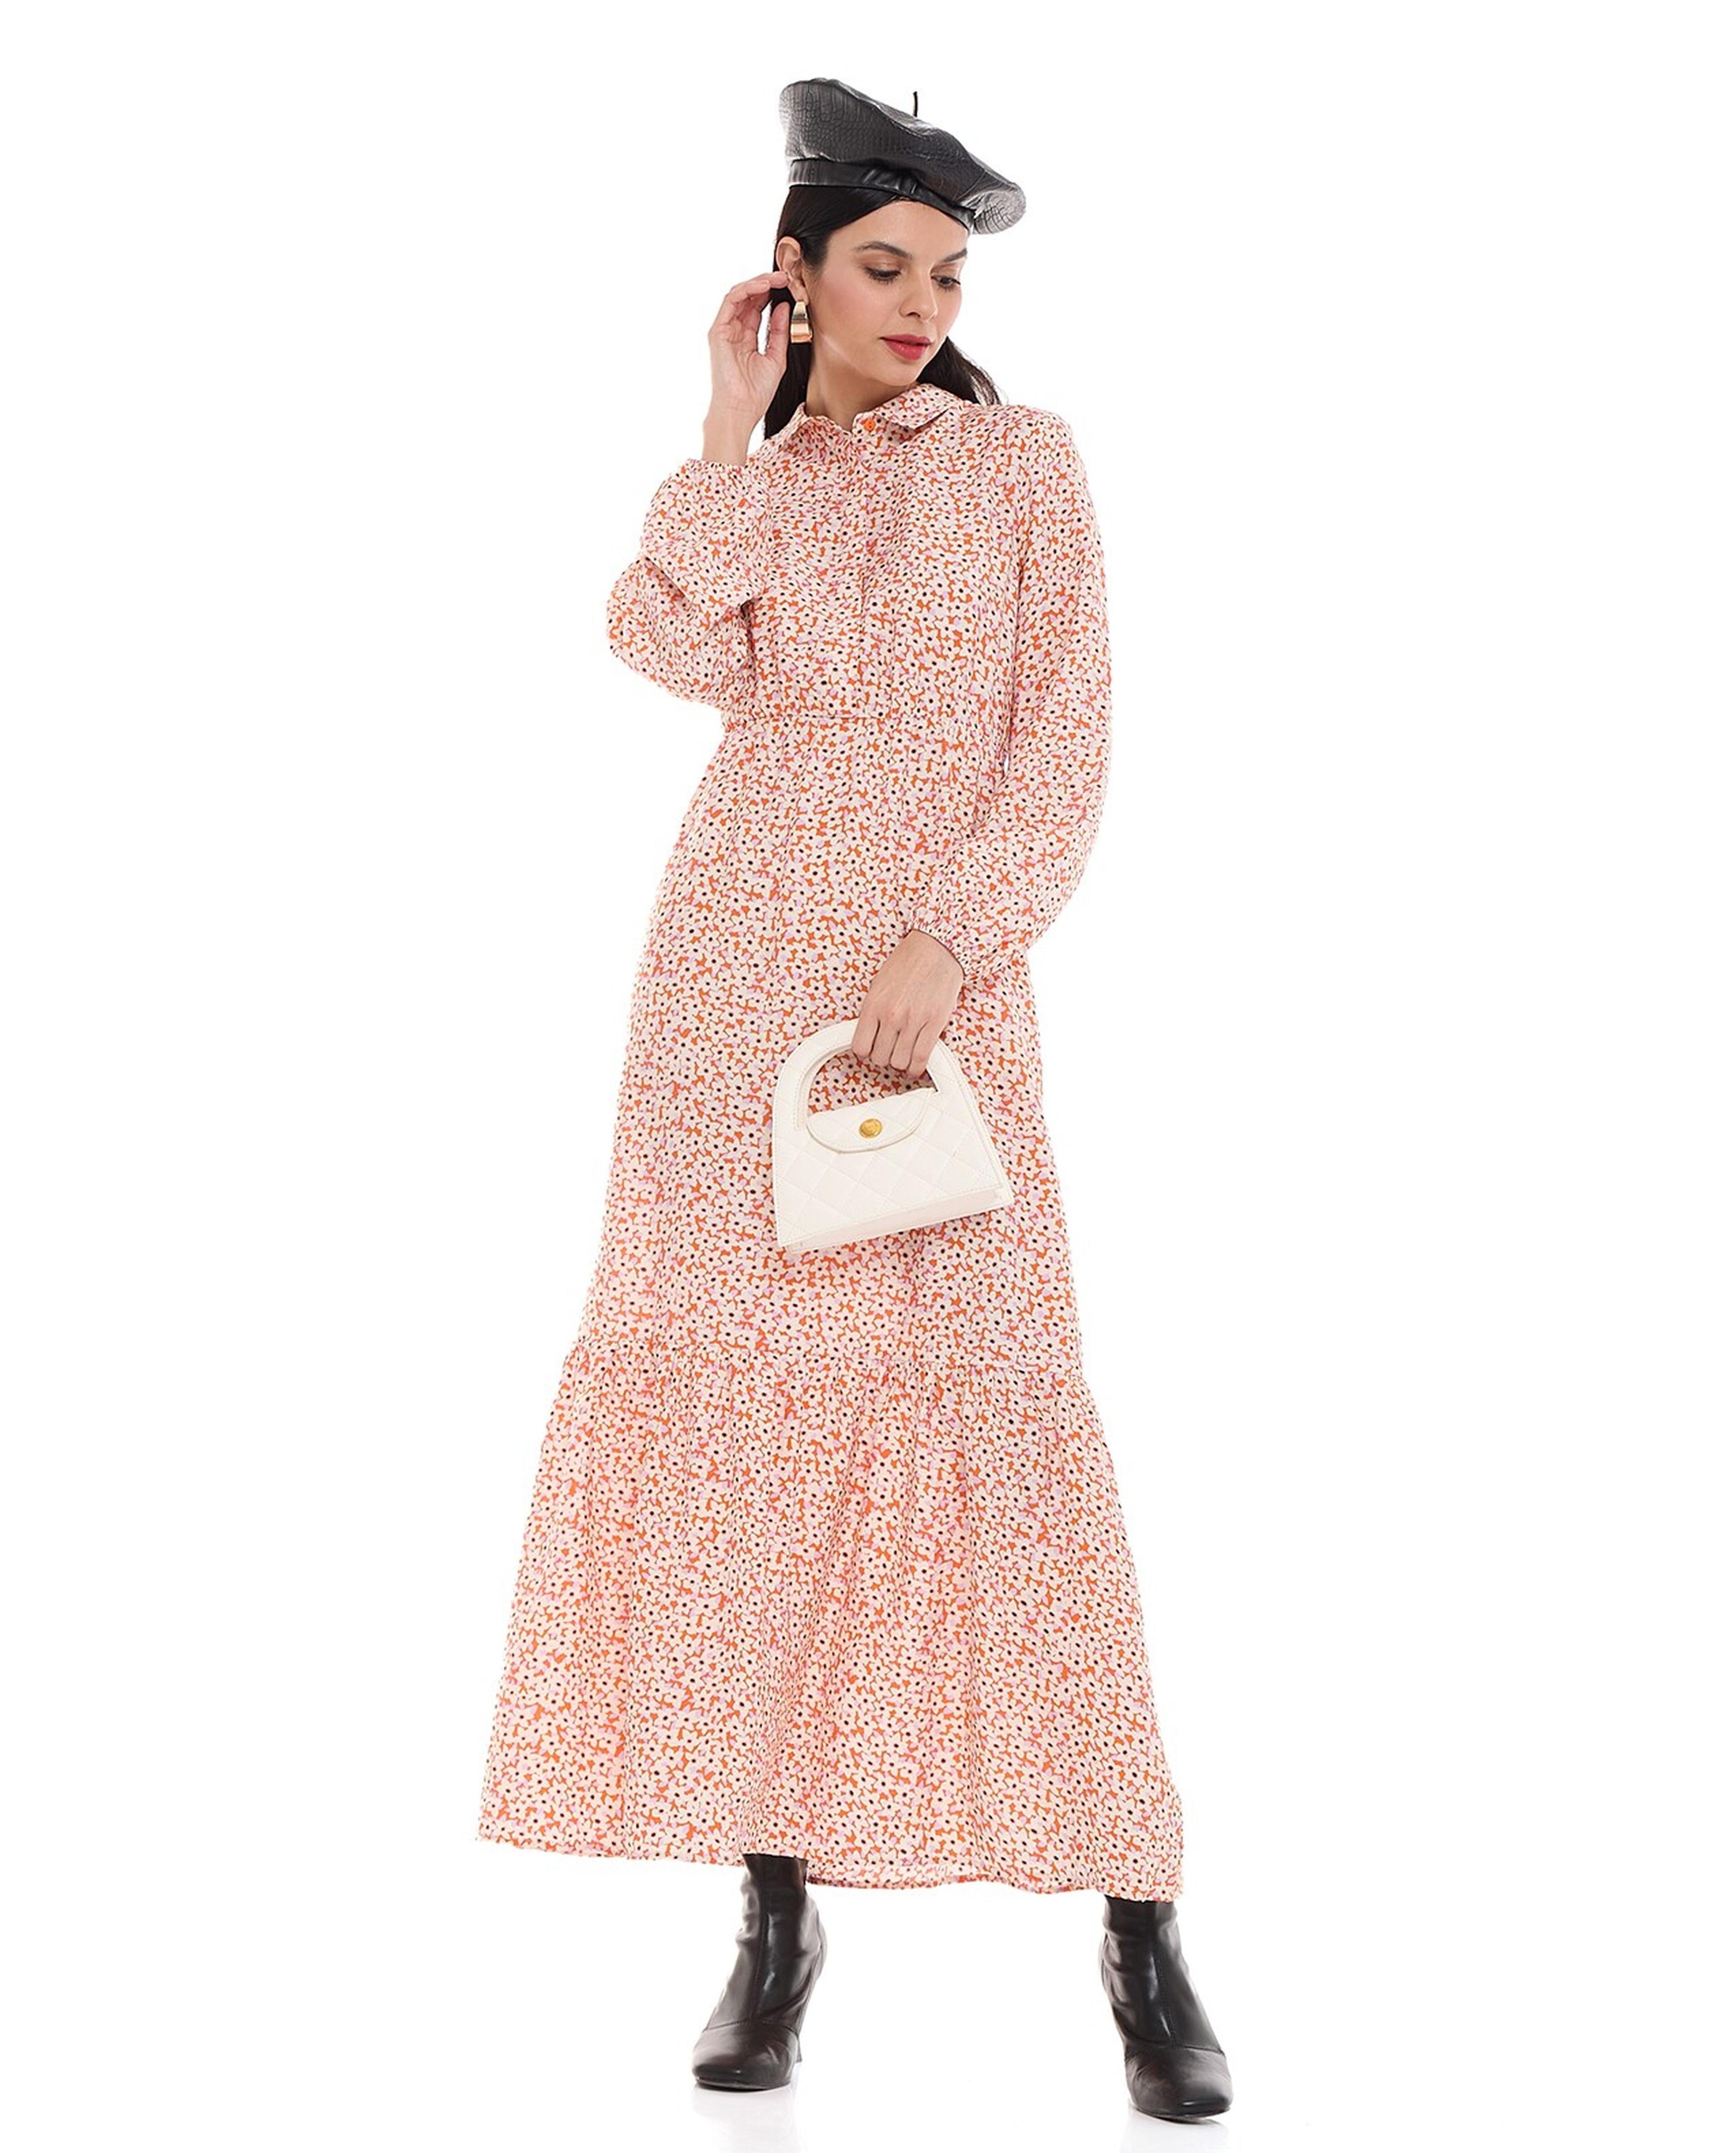 Floral Patterned Maxi Dress with Classic Collar and Long Sleeves